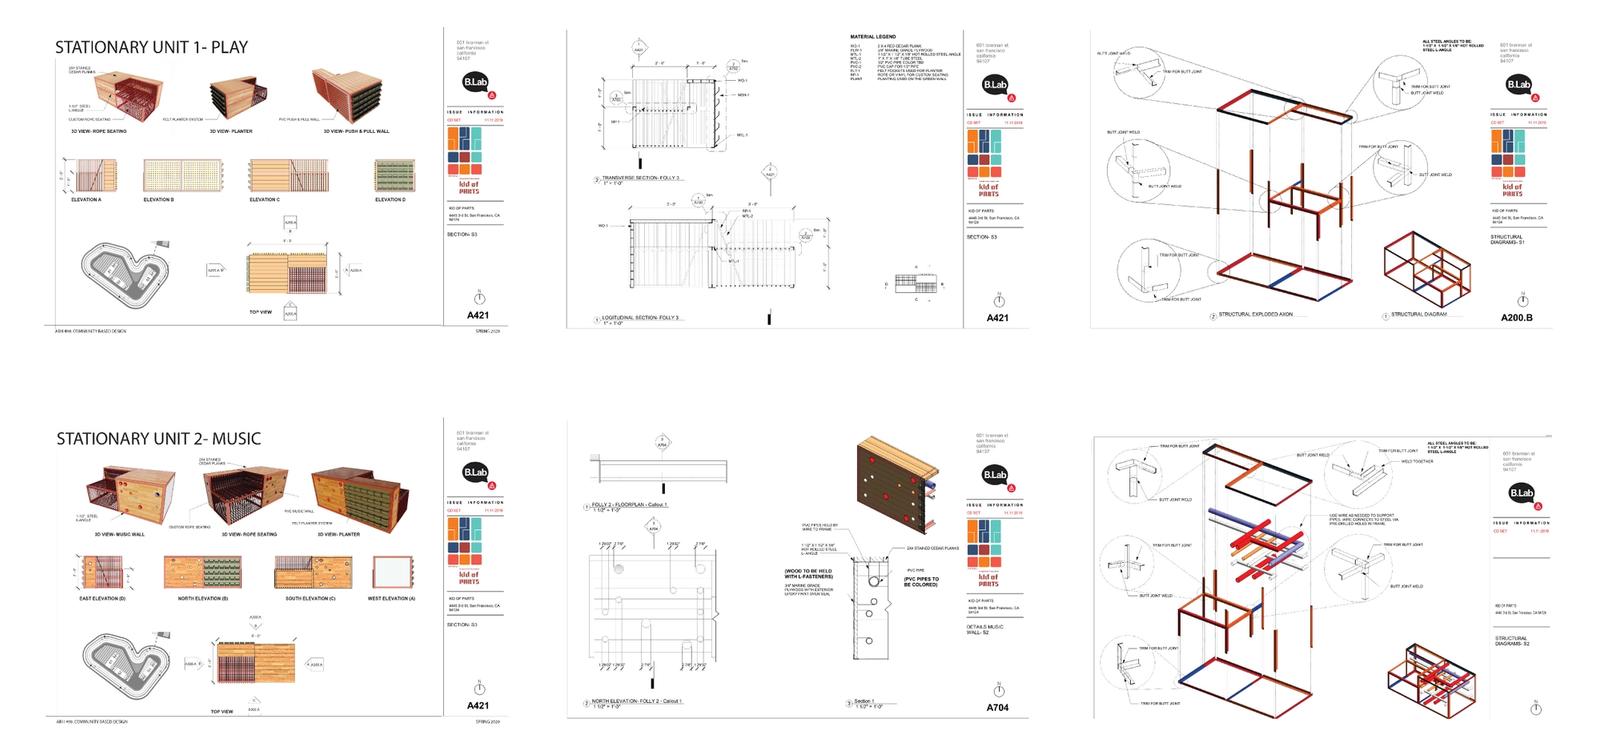 Construction Drawings